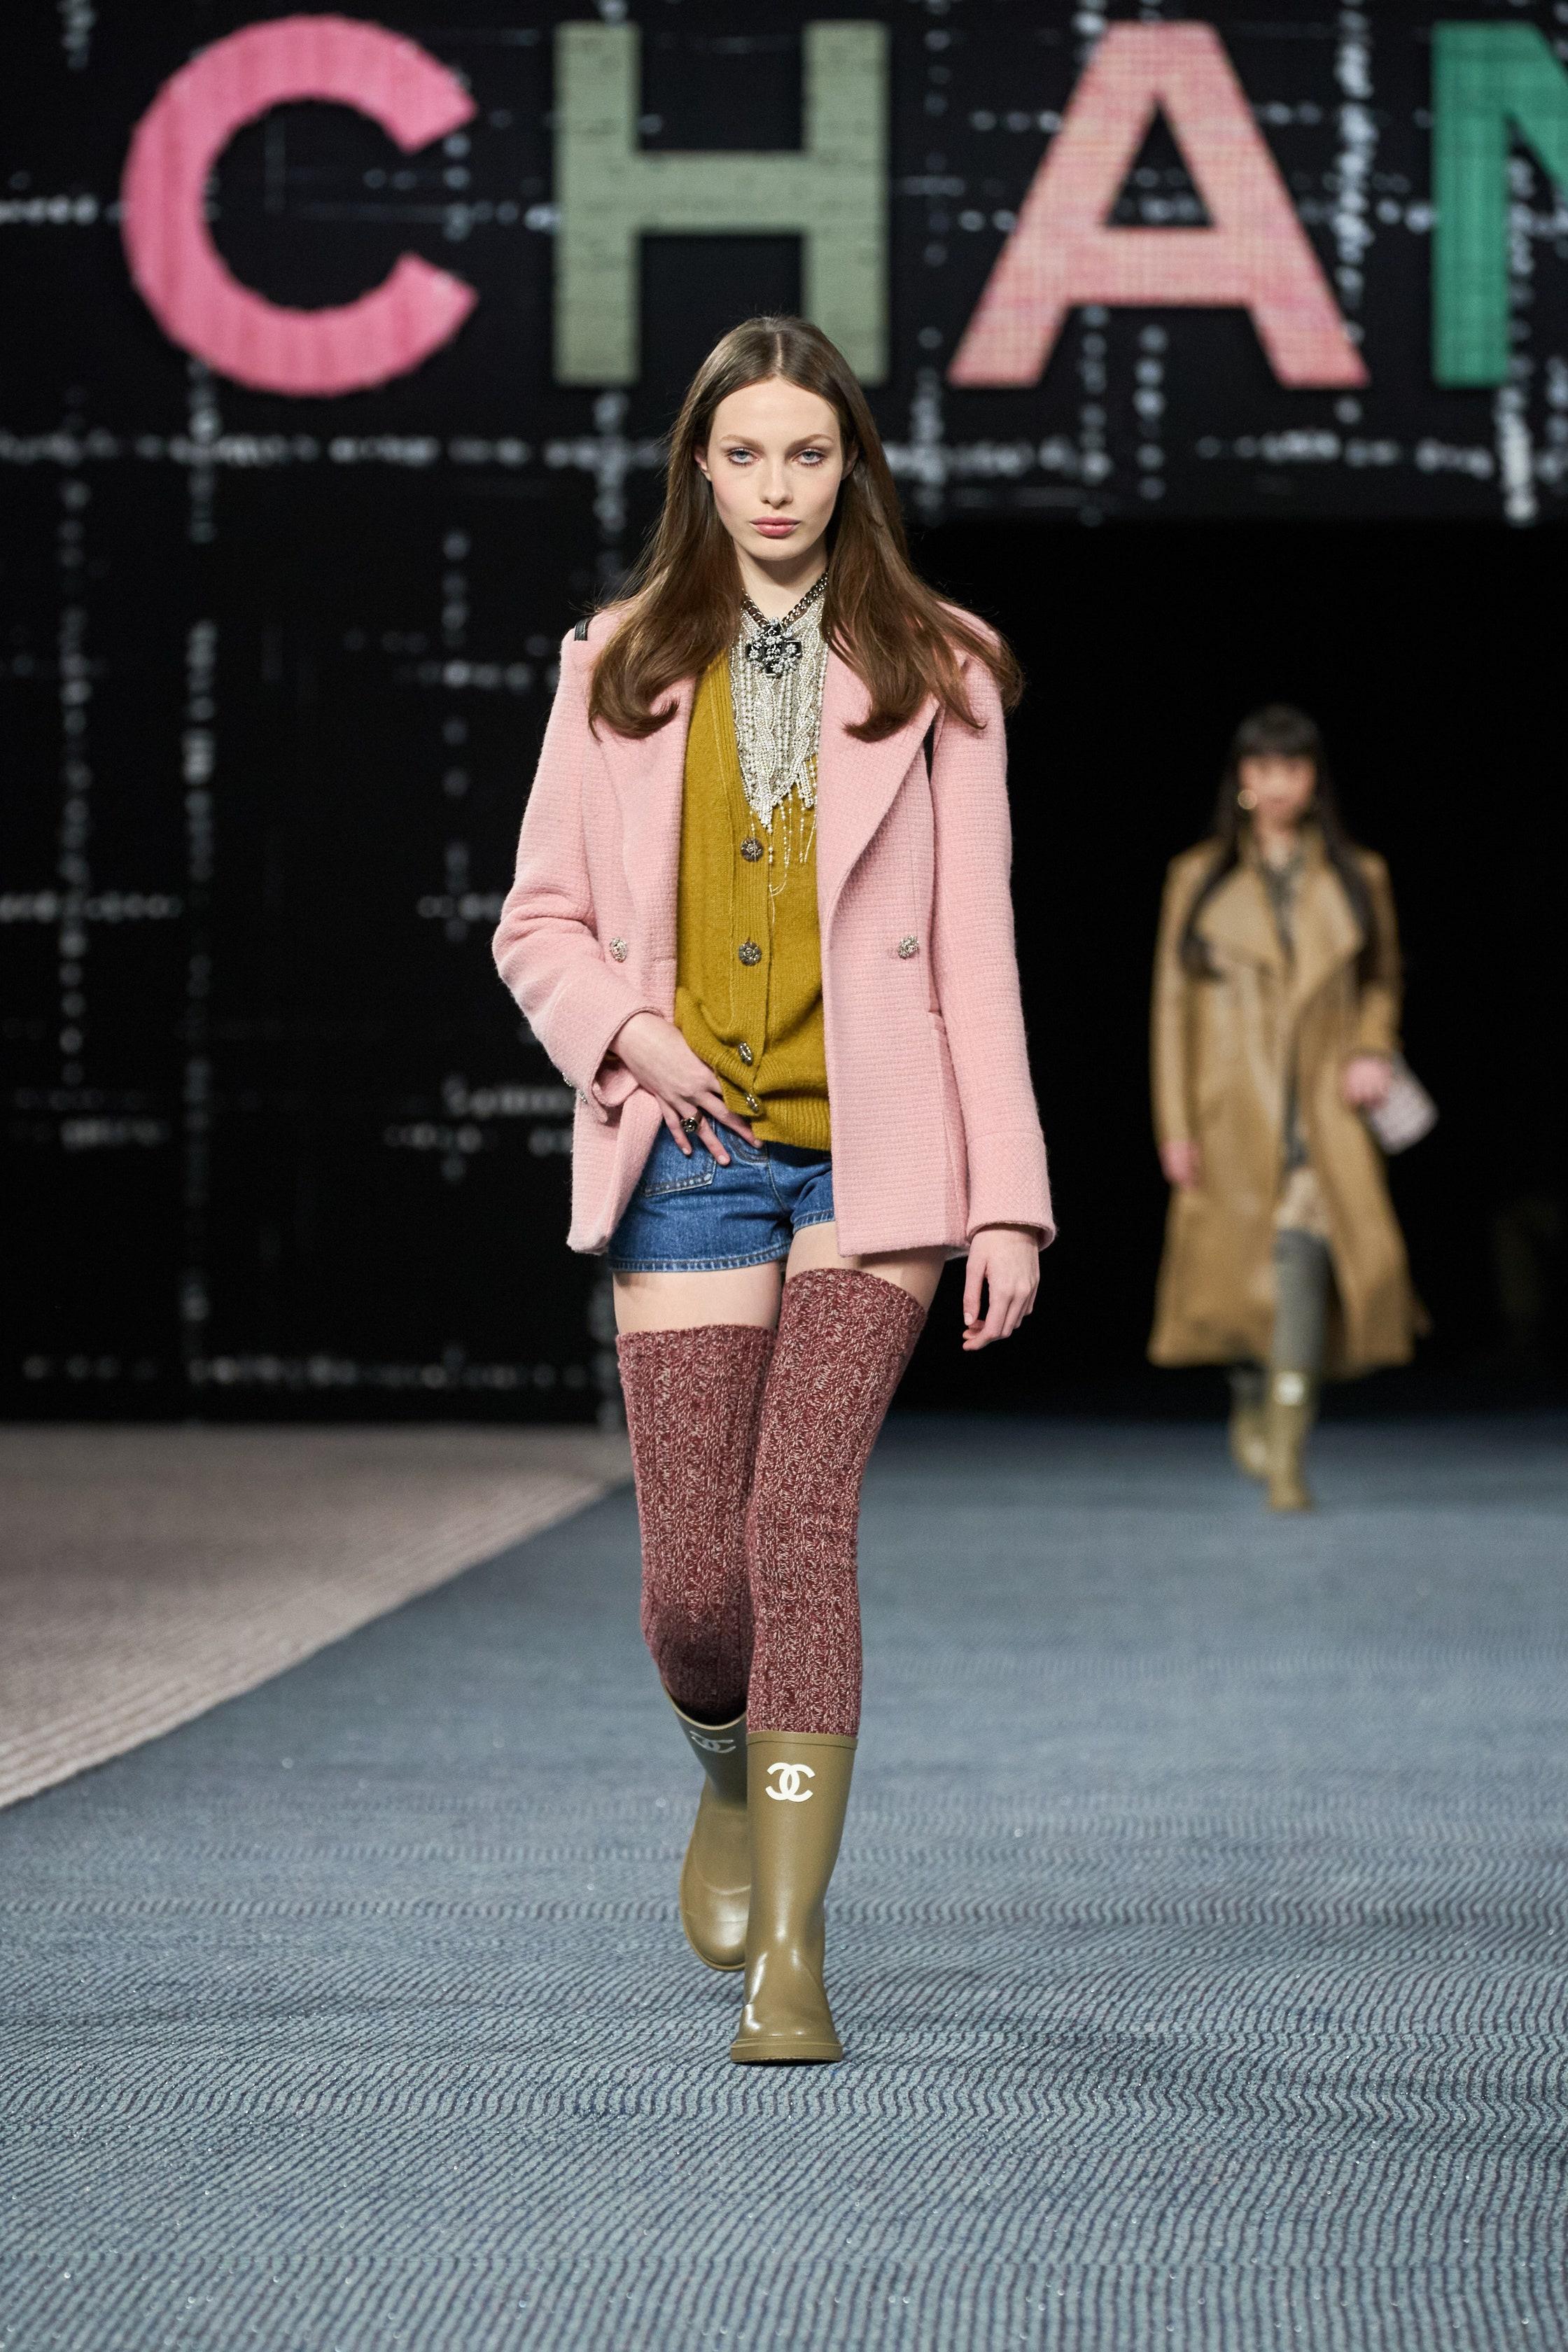 Look # 7 from Catwalk of 2022 Fall Chanel Collection, 22A
New Chanel tweed jacket in gorgeous pastel pink / dusty rose colour.
- marvellous CC logo jewel Gripoix buttons at front and cuffs
- tonal silk lining with camellias, chain link at hem
Size